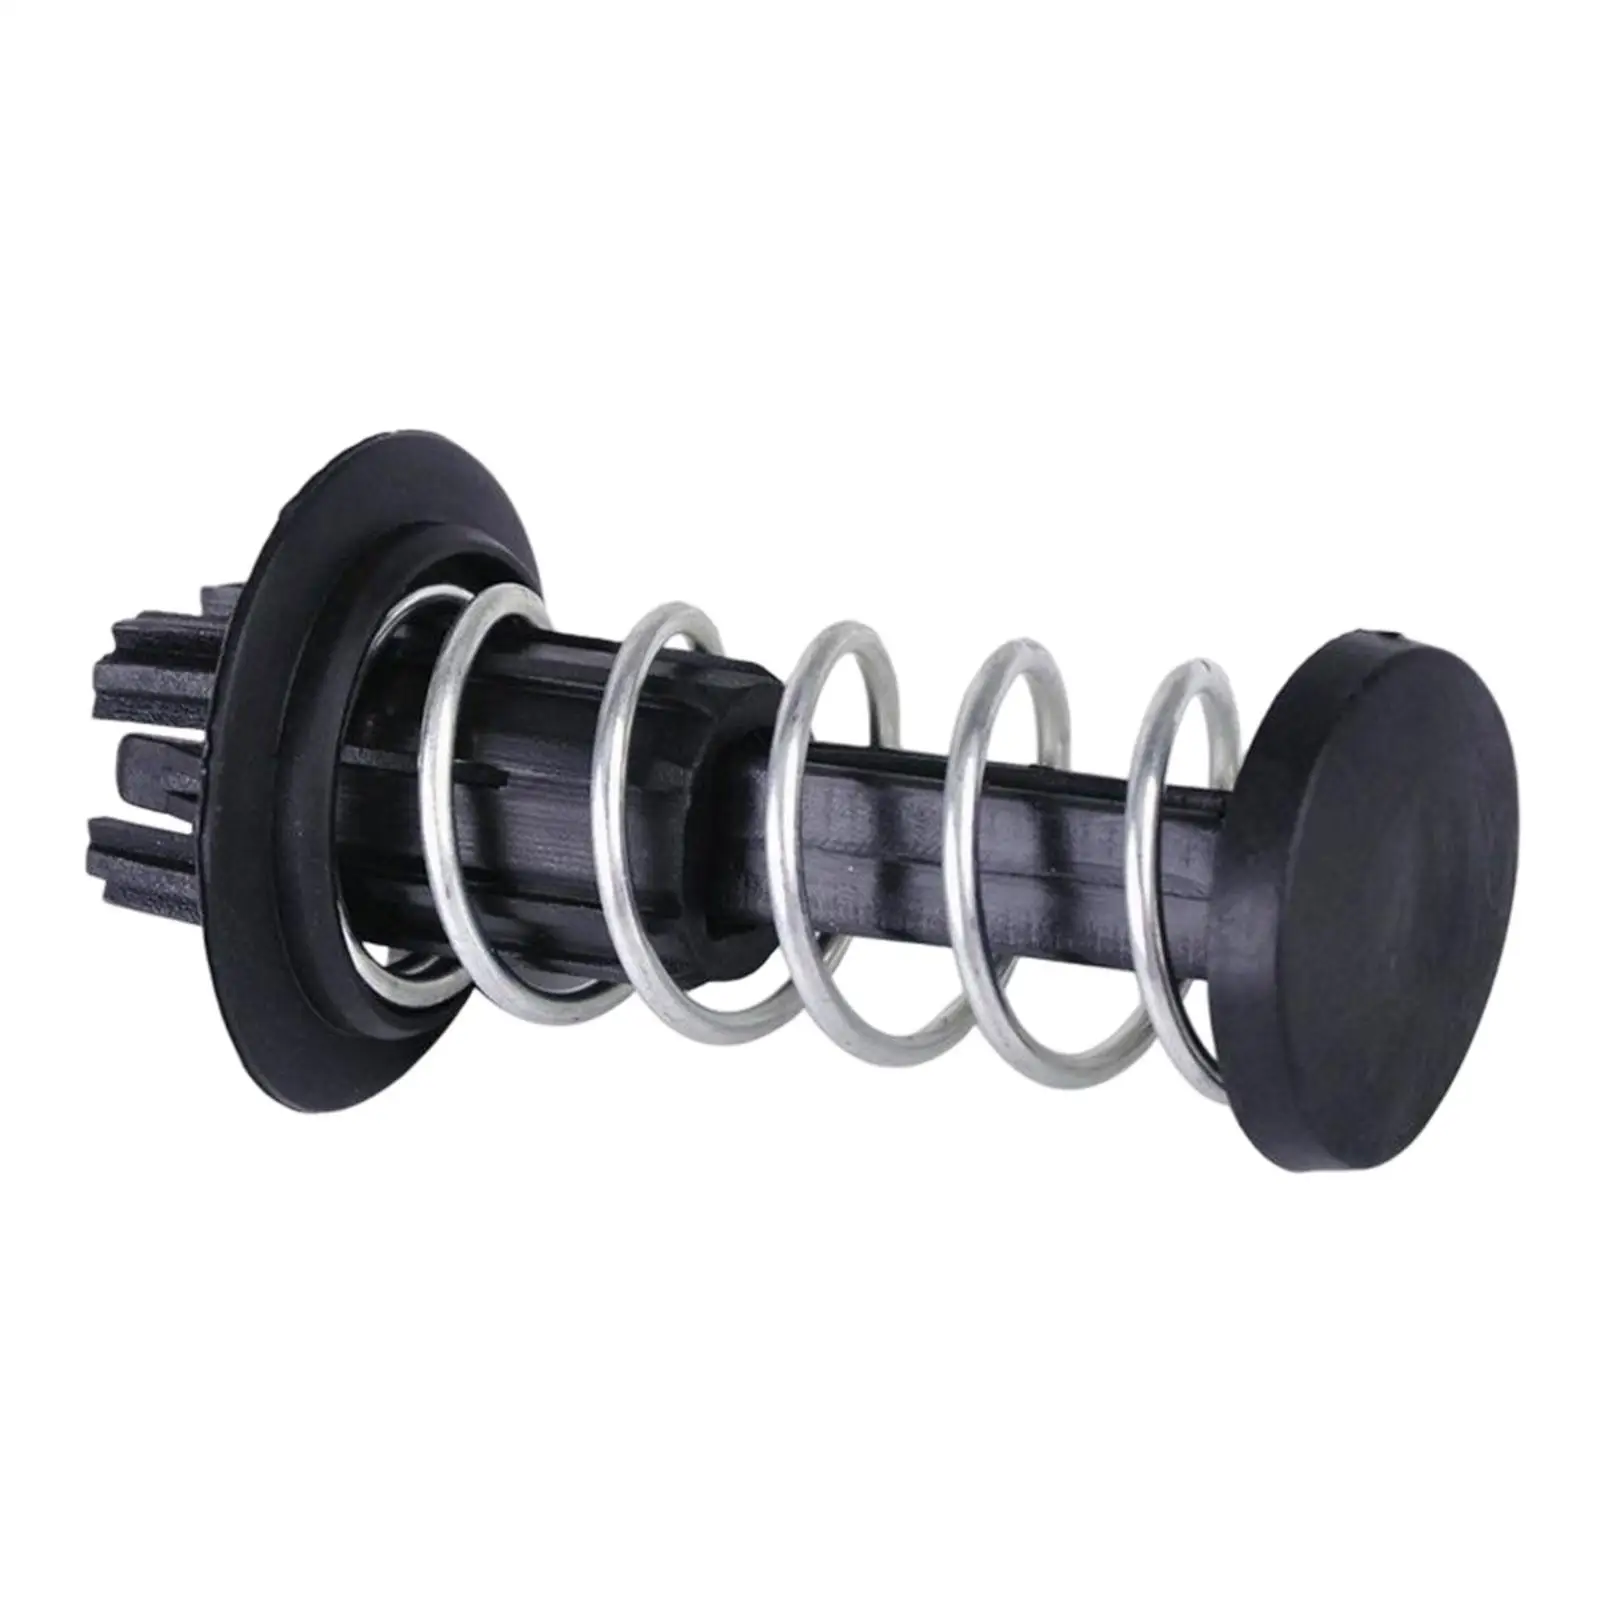 Automobile Hood Spring 2048800227 Replacement Accessories Durable Black Color Easily Install